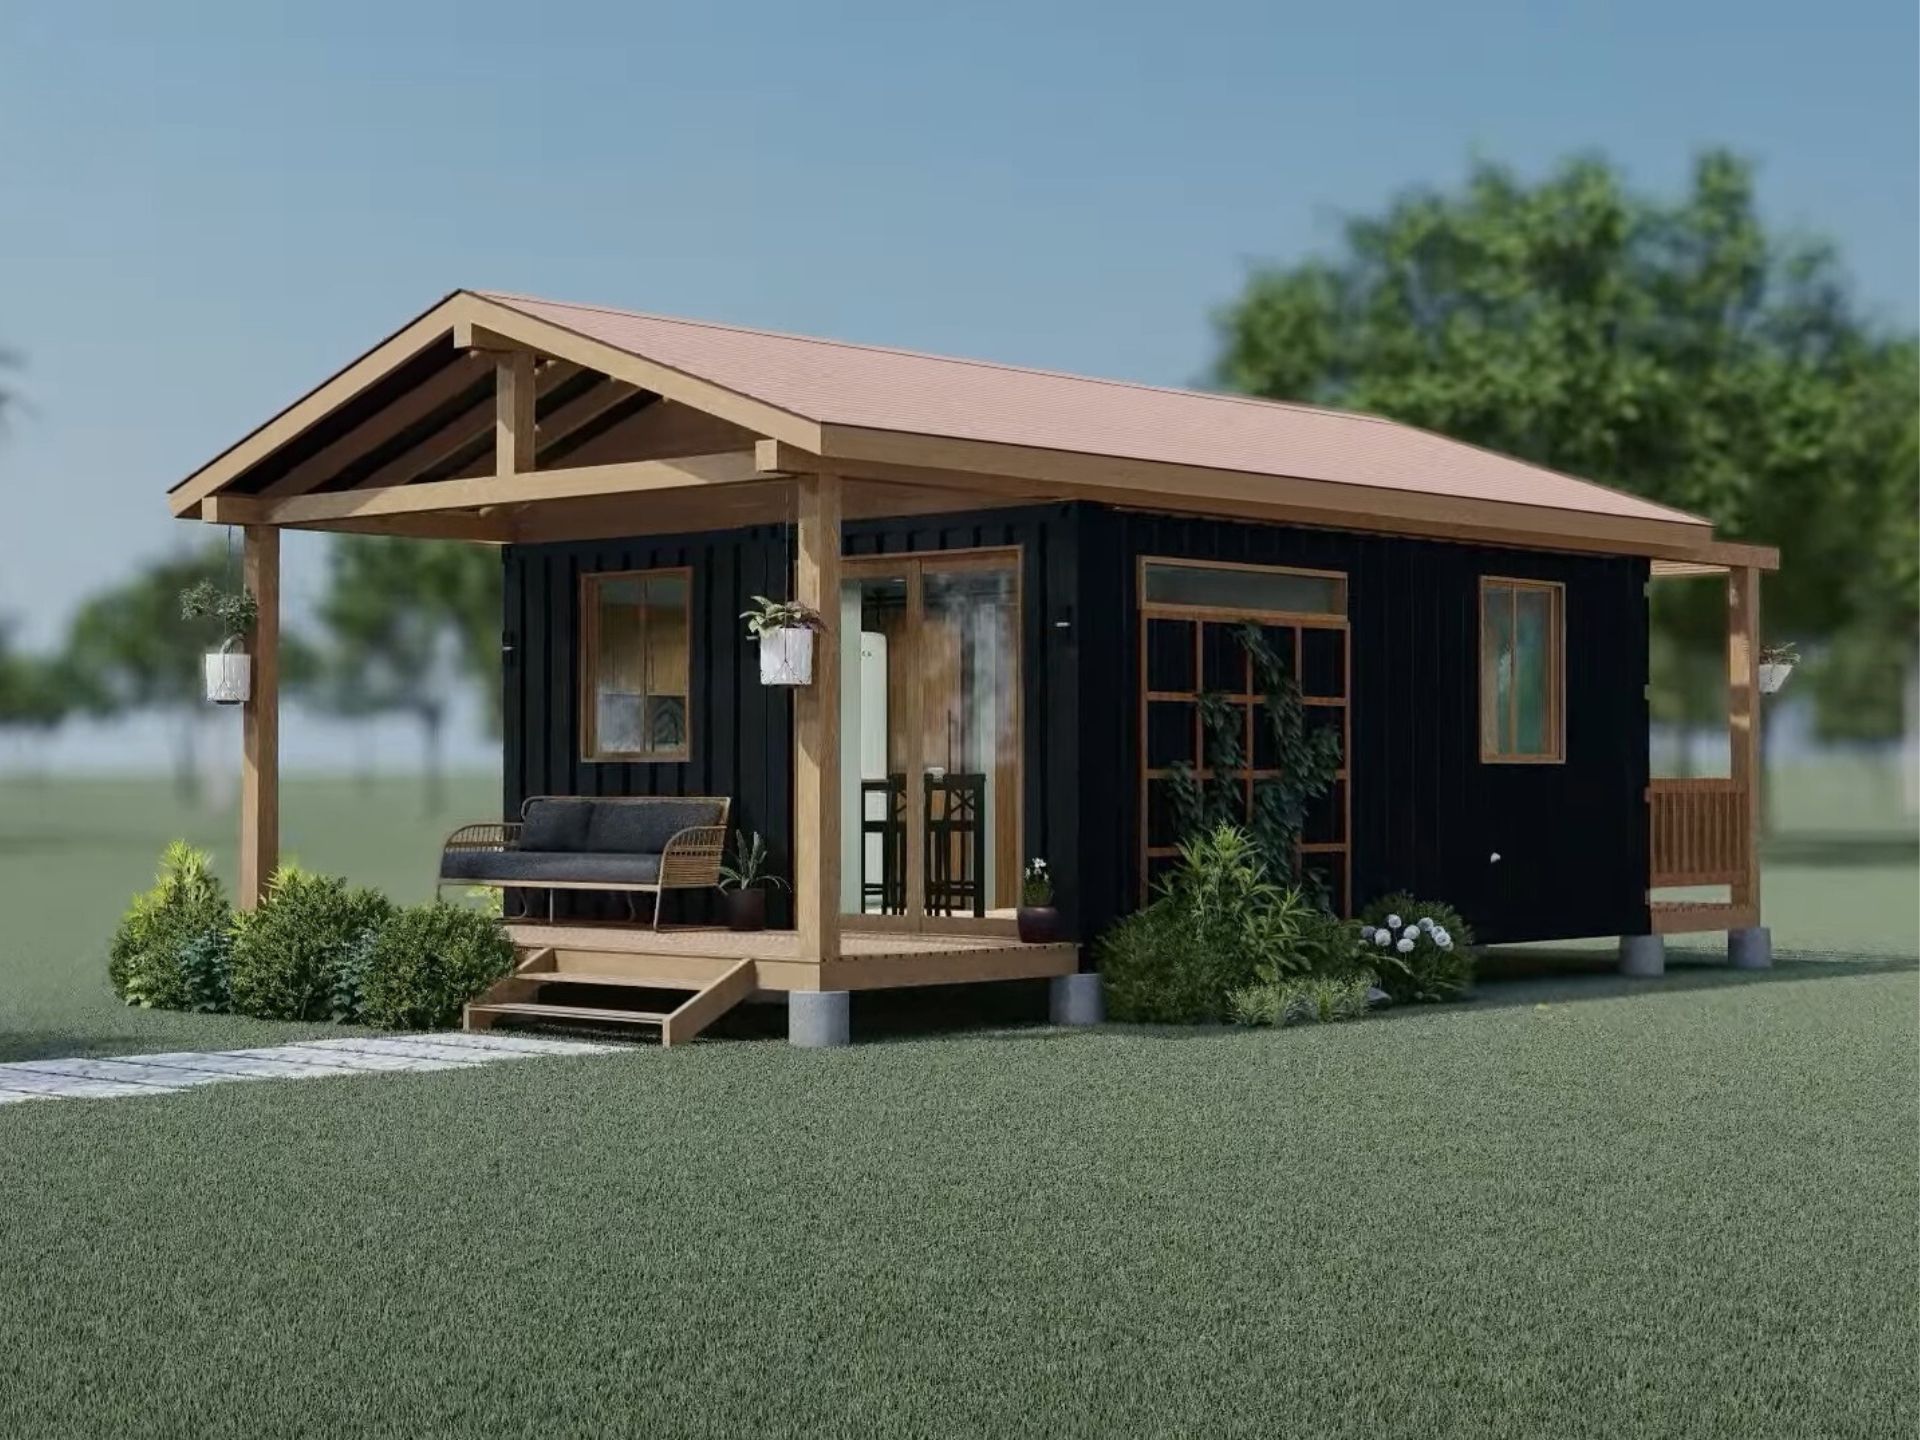 This Chic Little Shipping Container Provides All The Coziness You Need In A Home